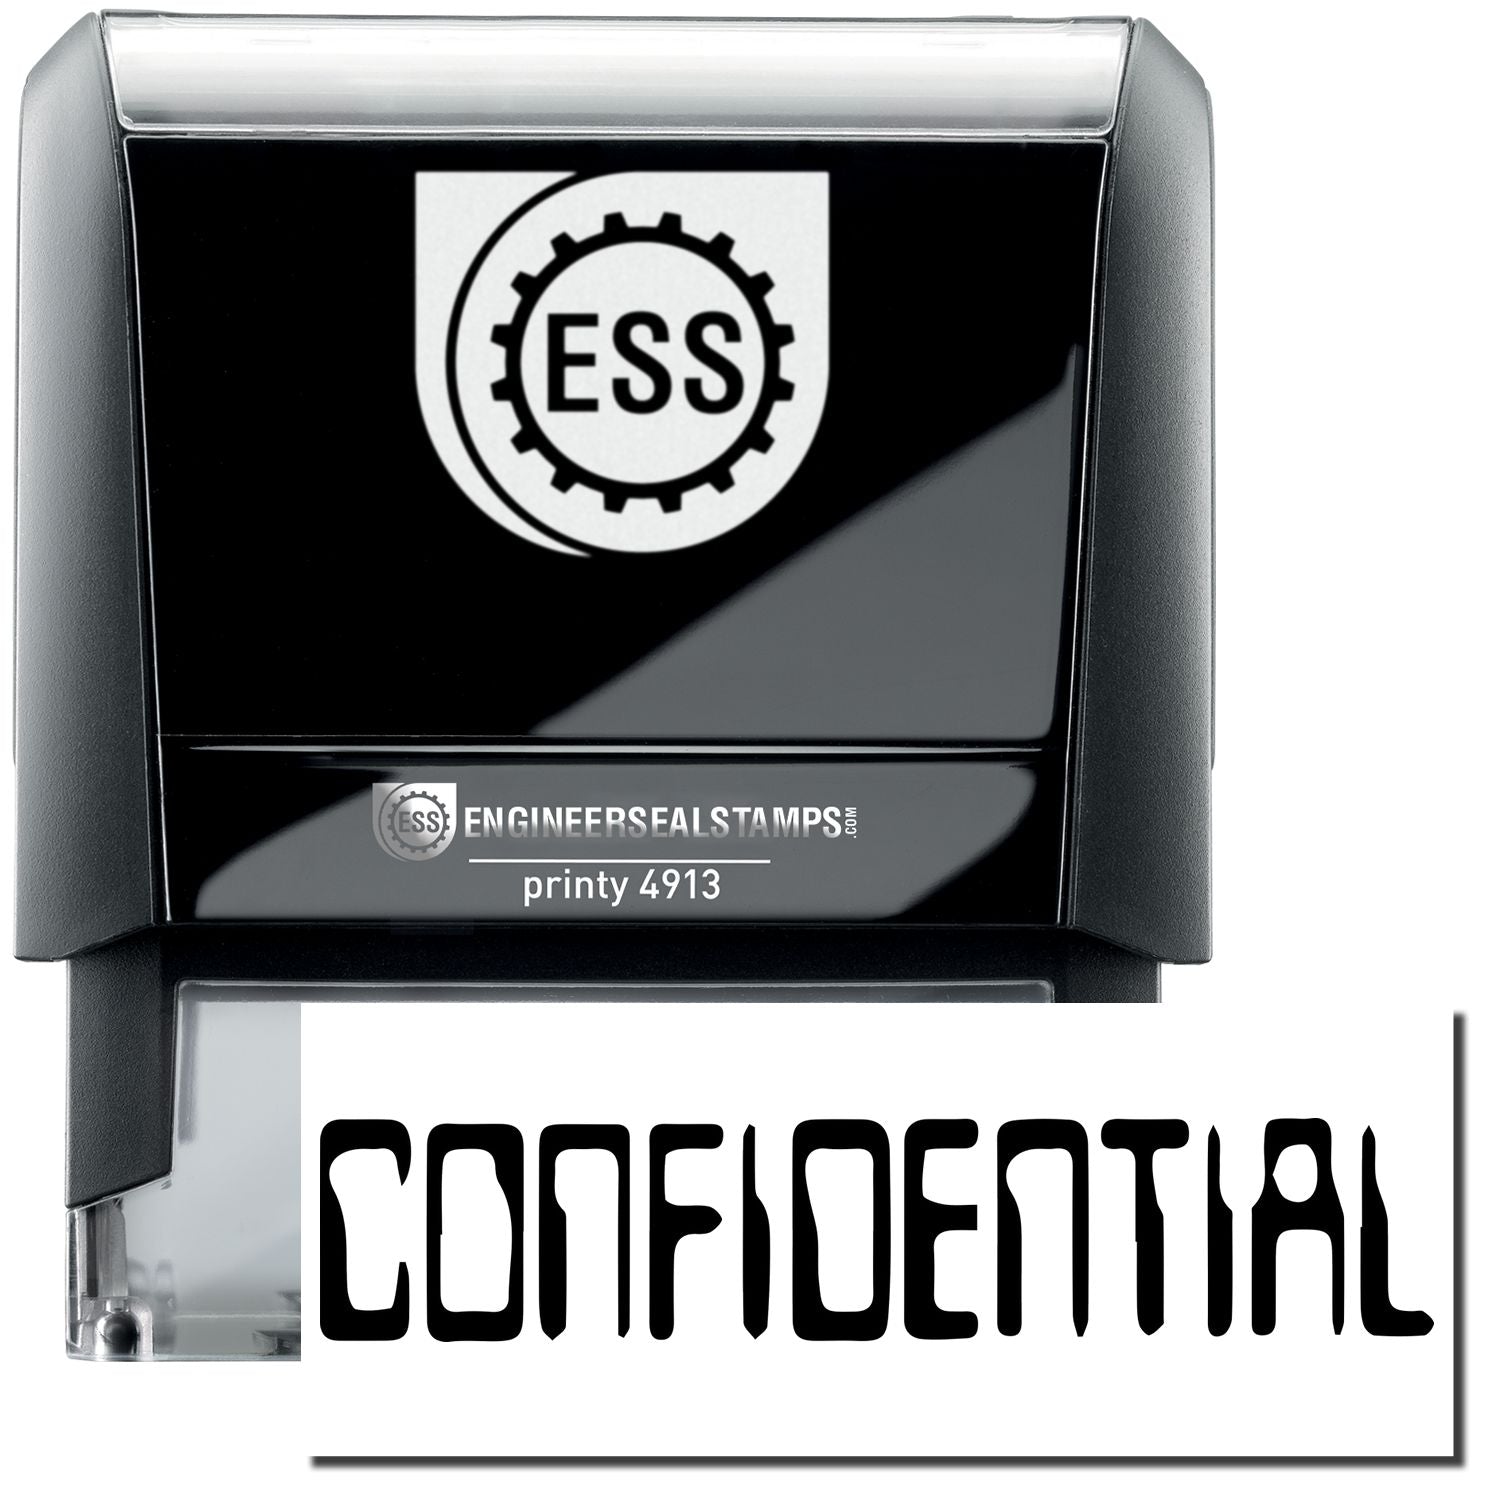 A self-inking stamp with a stamped image showing how the text "CONFIDENTIAL" in a large barcode font is displayed by it after stamping.